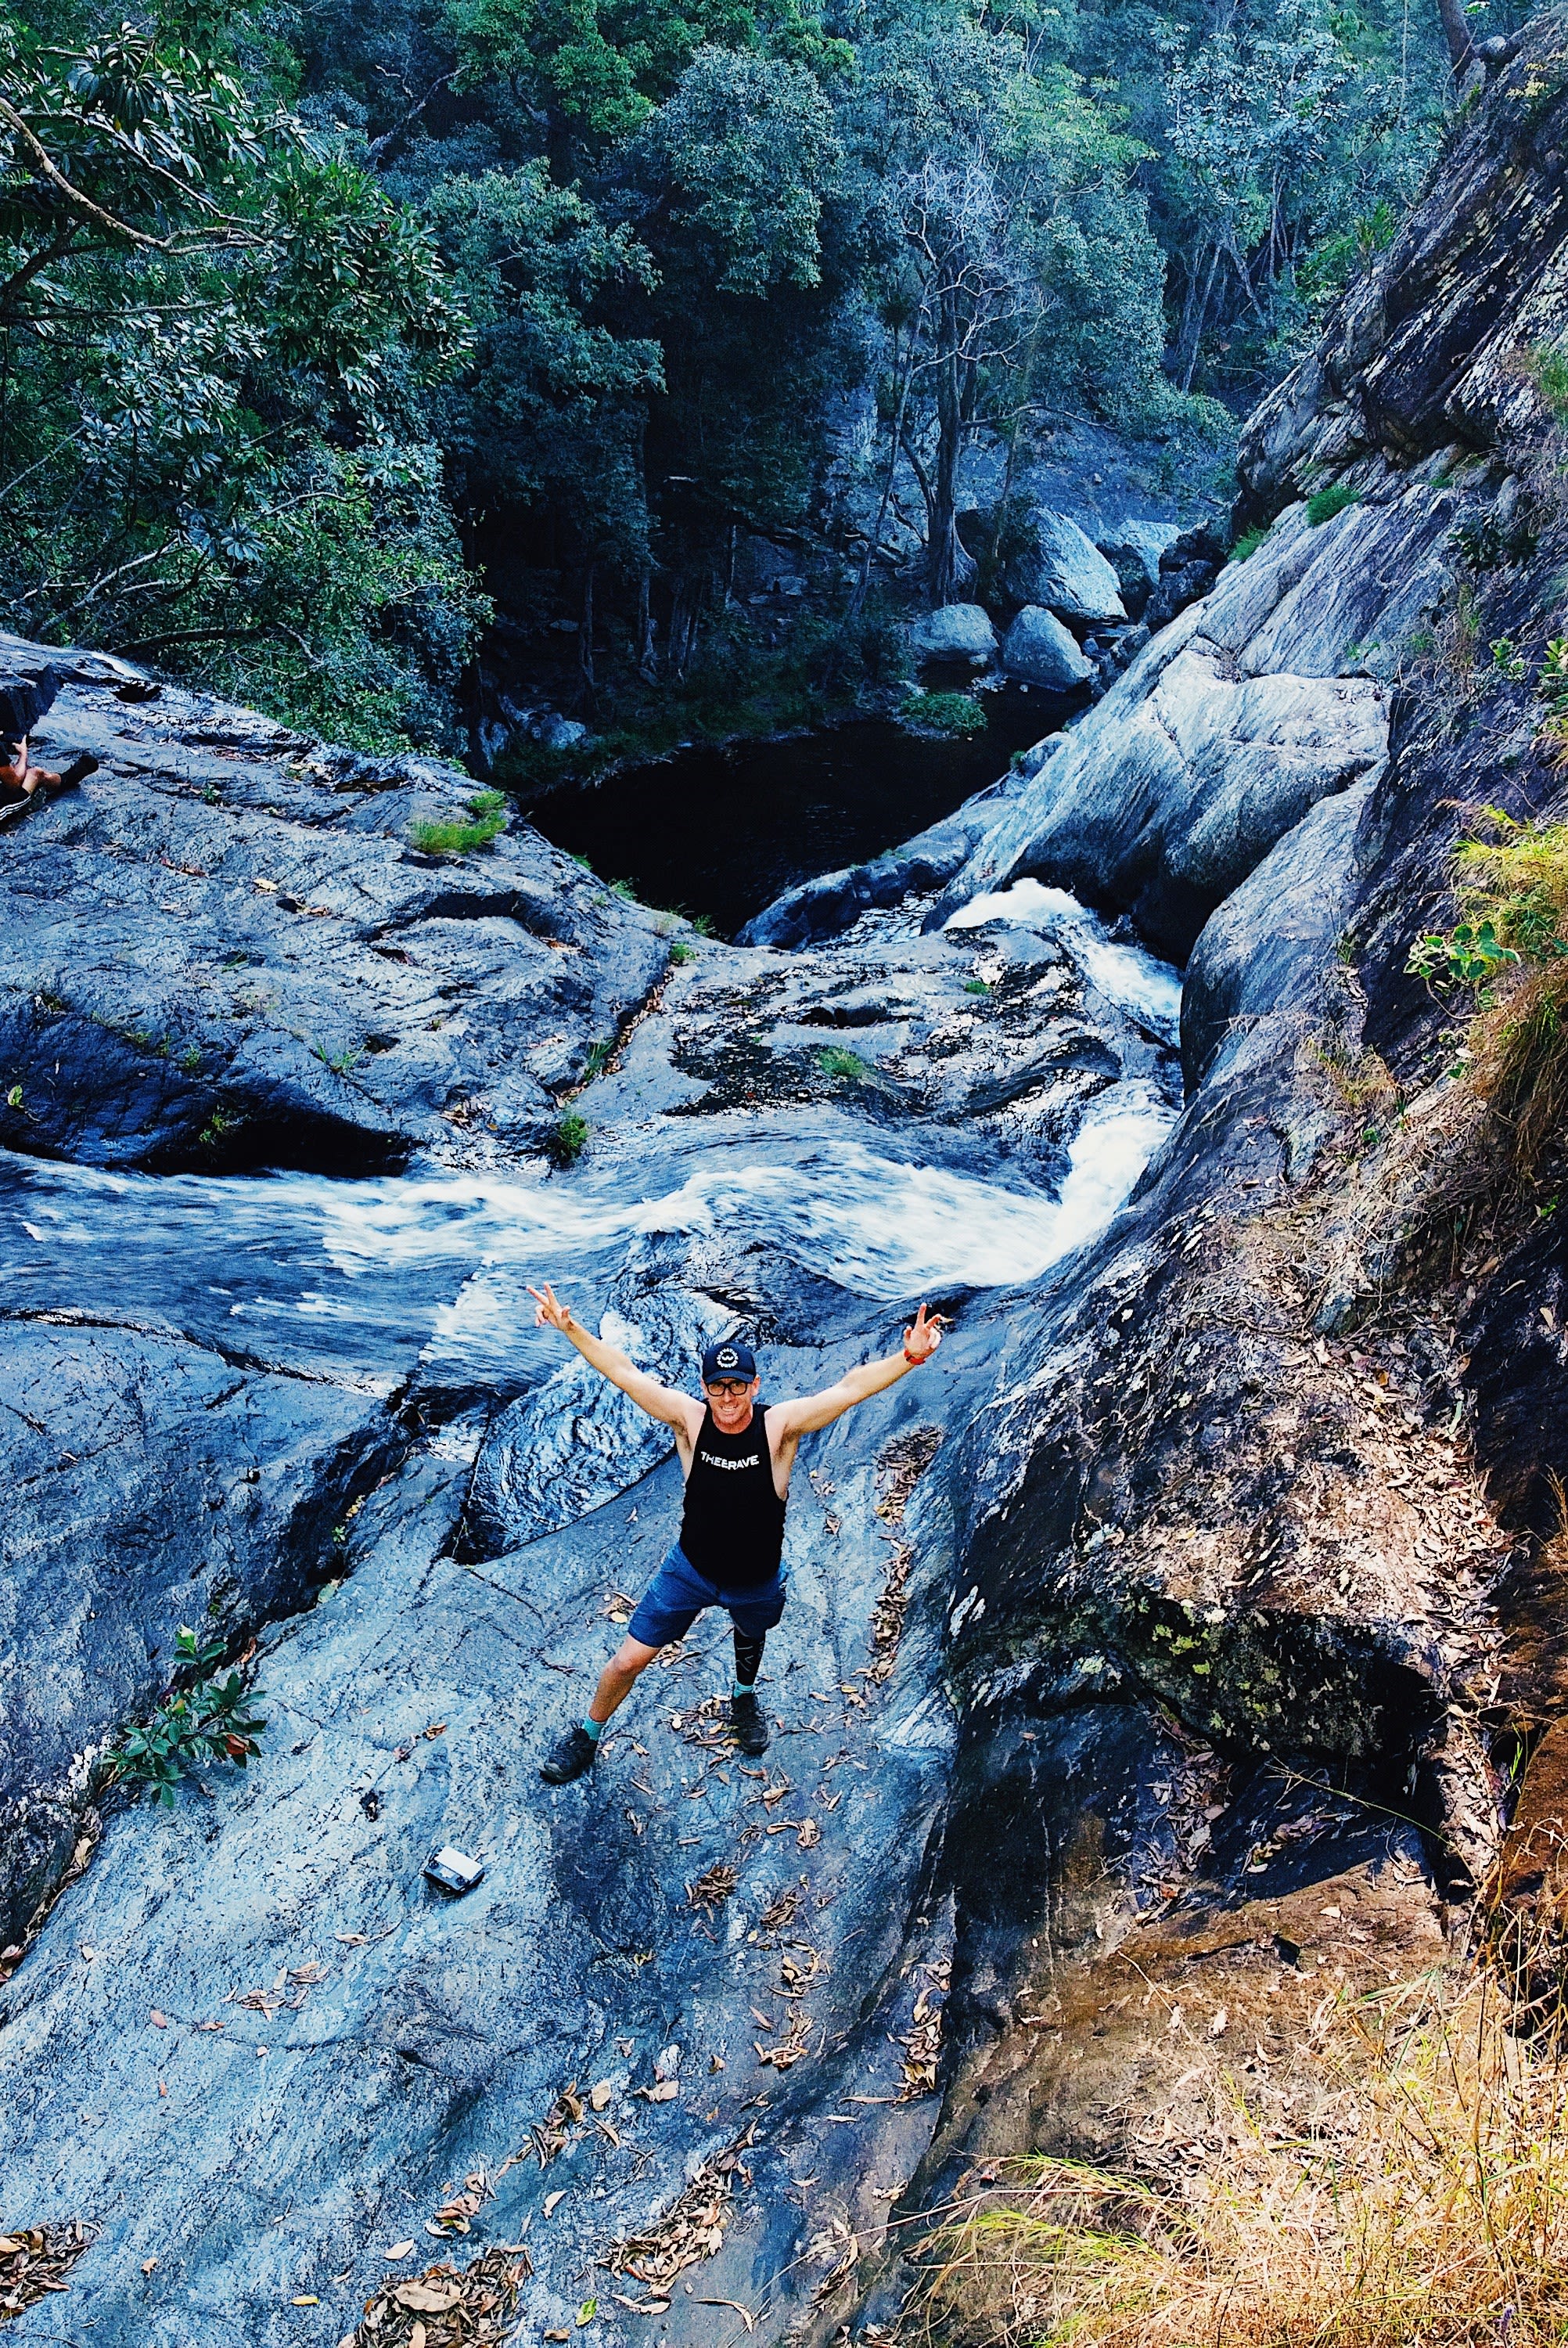 A man smiling and doing the peace sign. Behind him is a waterfall.